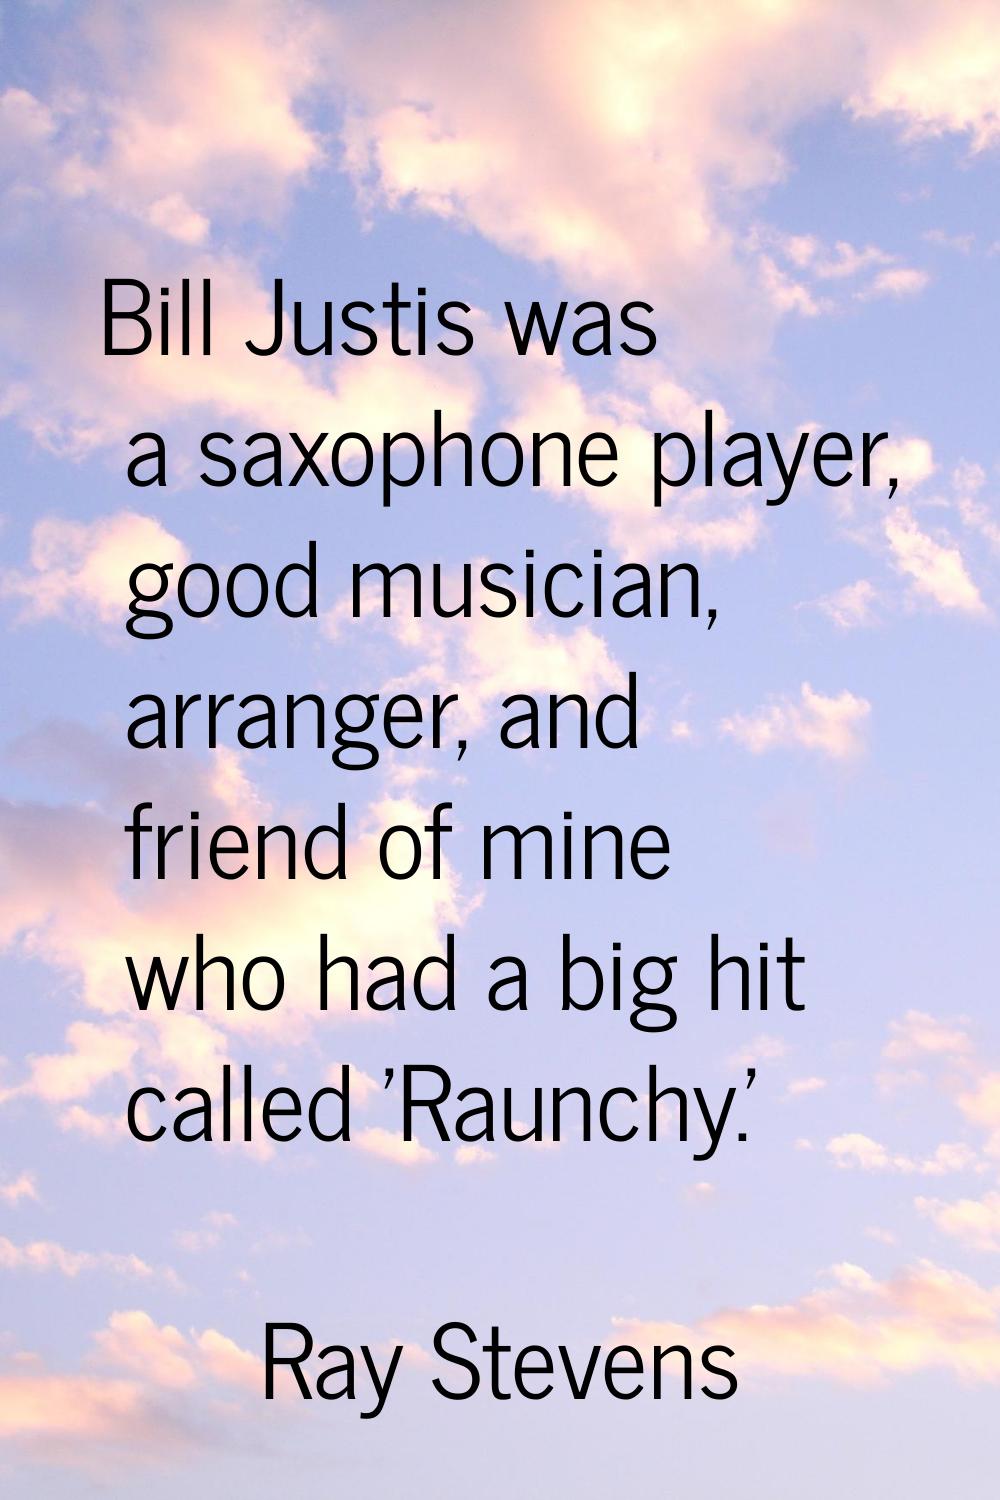 Bill Justis was a saxophone player, good musician, arranger, and friend of mine who had a big hit c